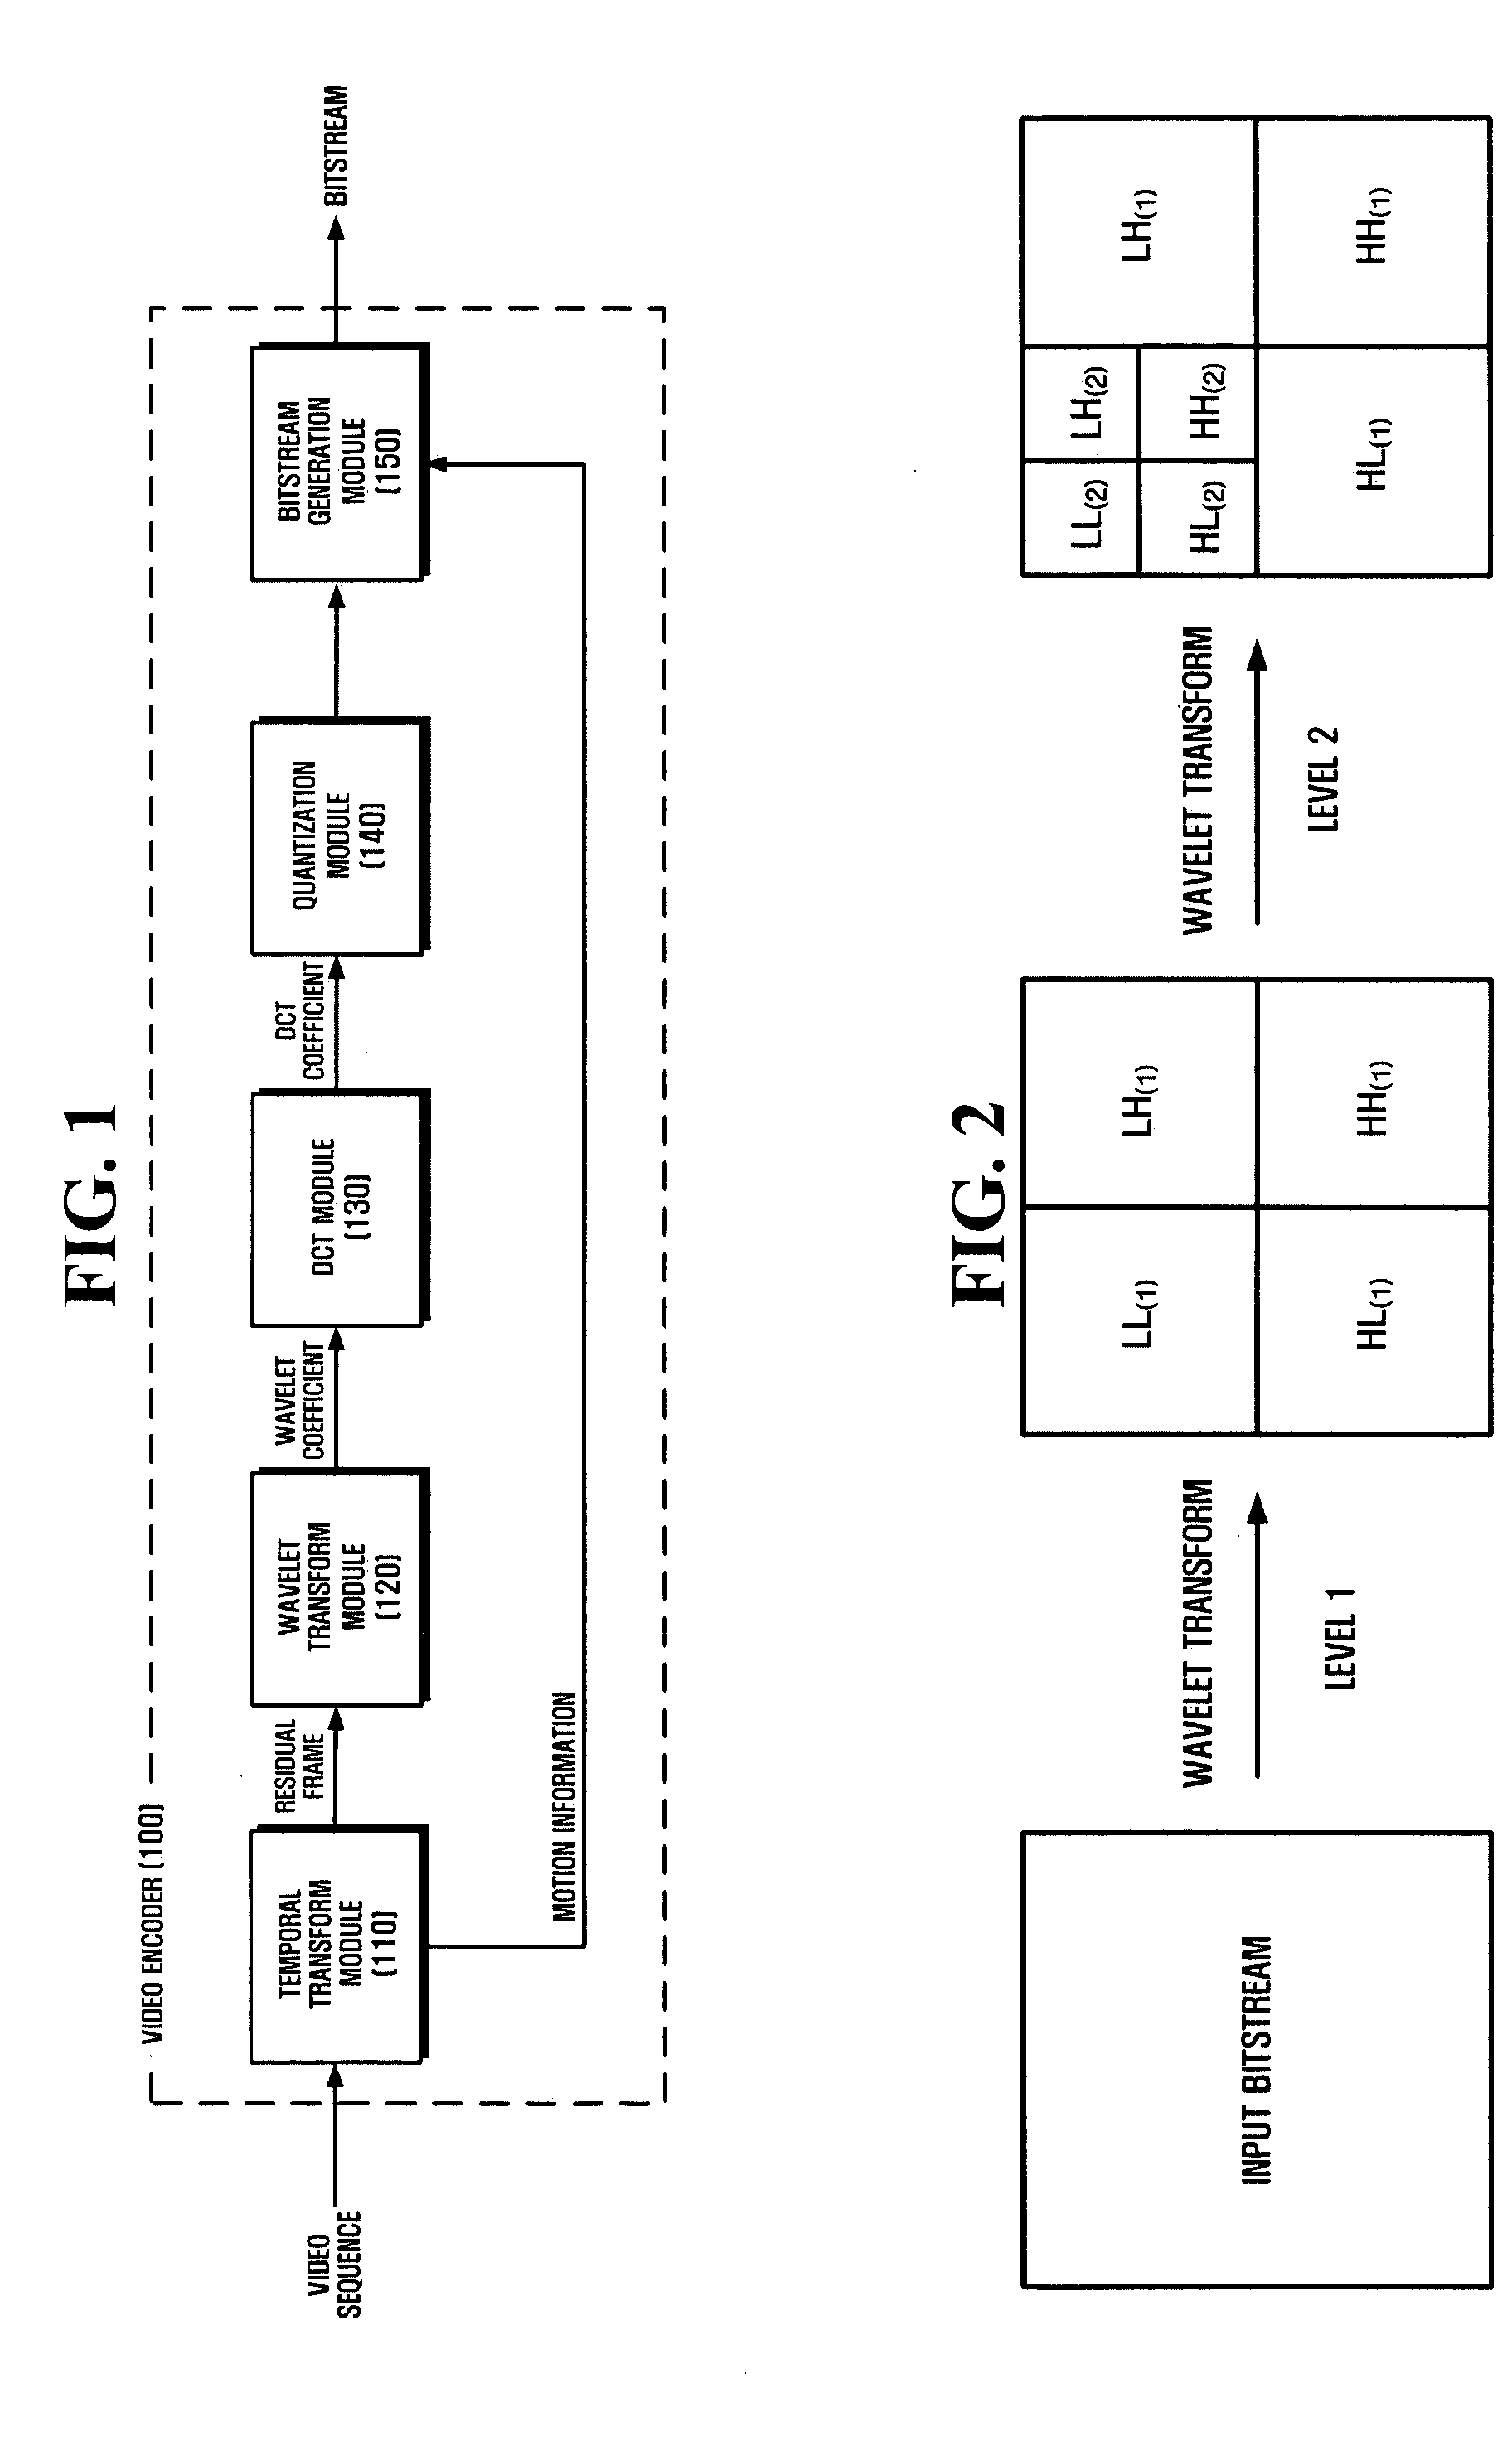 Video coding method and apparatus